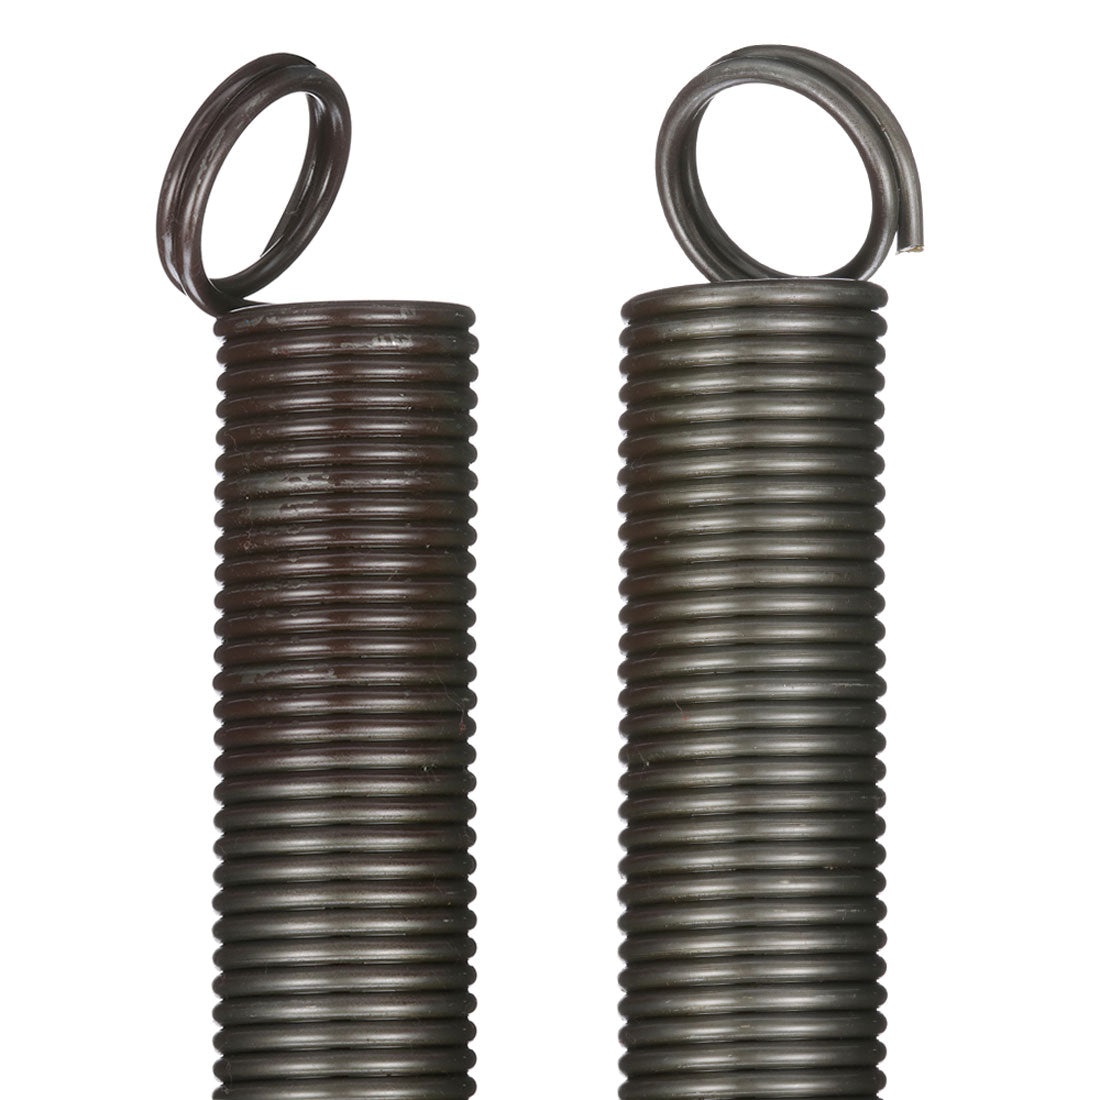 DURA-LIFT 160 lb Heavy-Duty Doubled-Looped Garage Door Extension Spring (2-Pack)